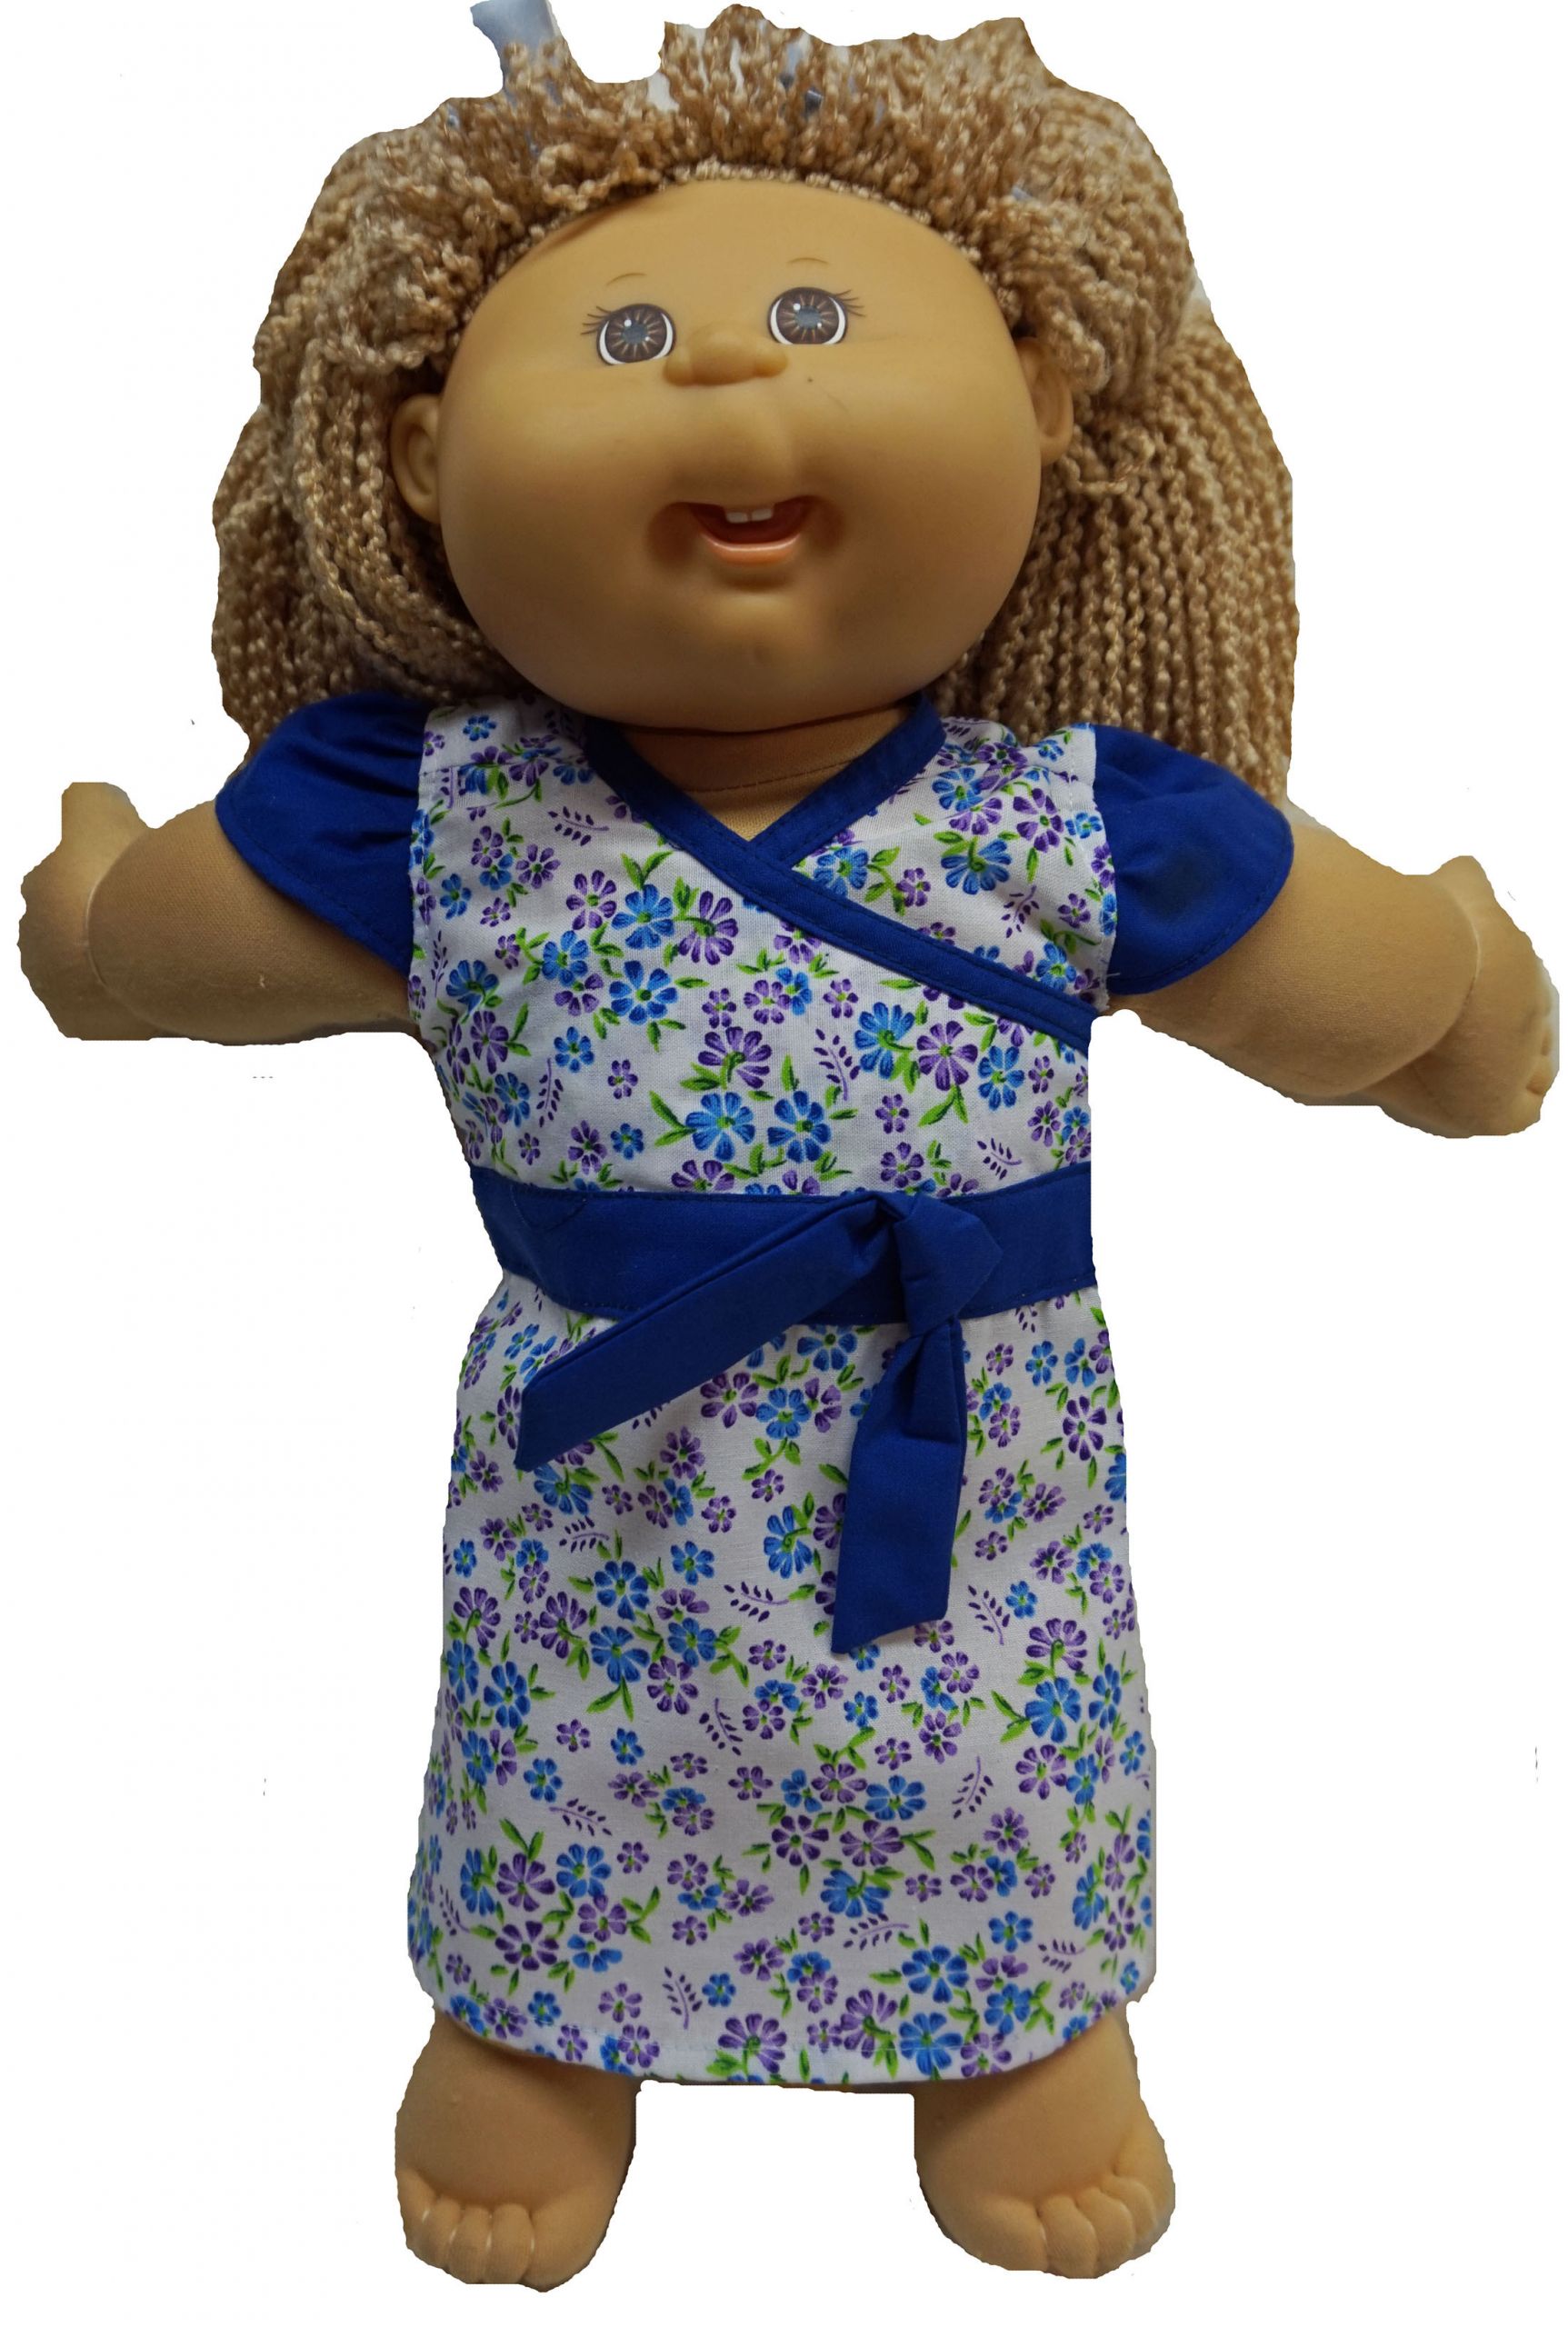 Cabbage Patch Kids Clothes Fresh Doll Clothes Superstore Doll Clothes Superstore Dressed to